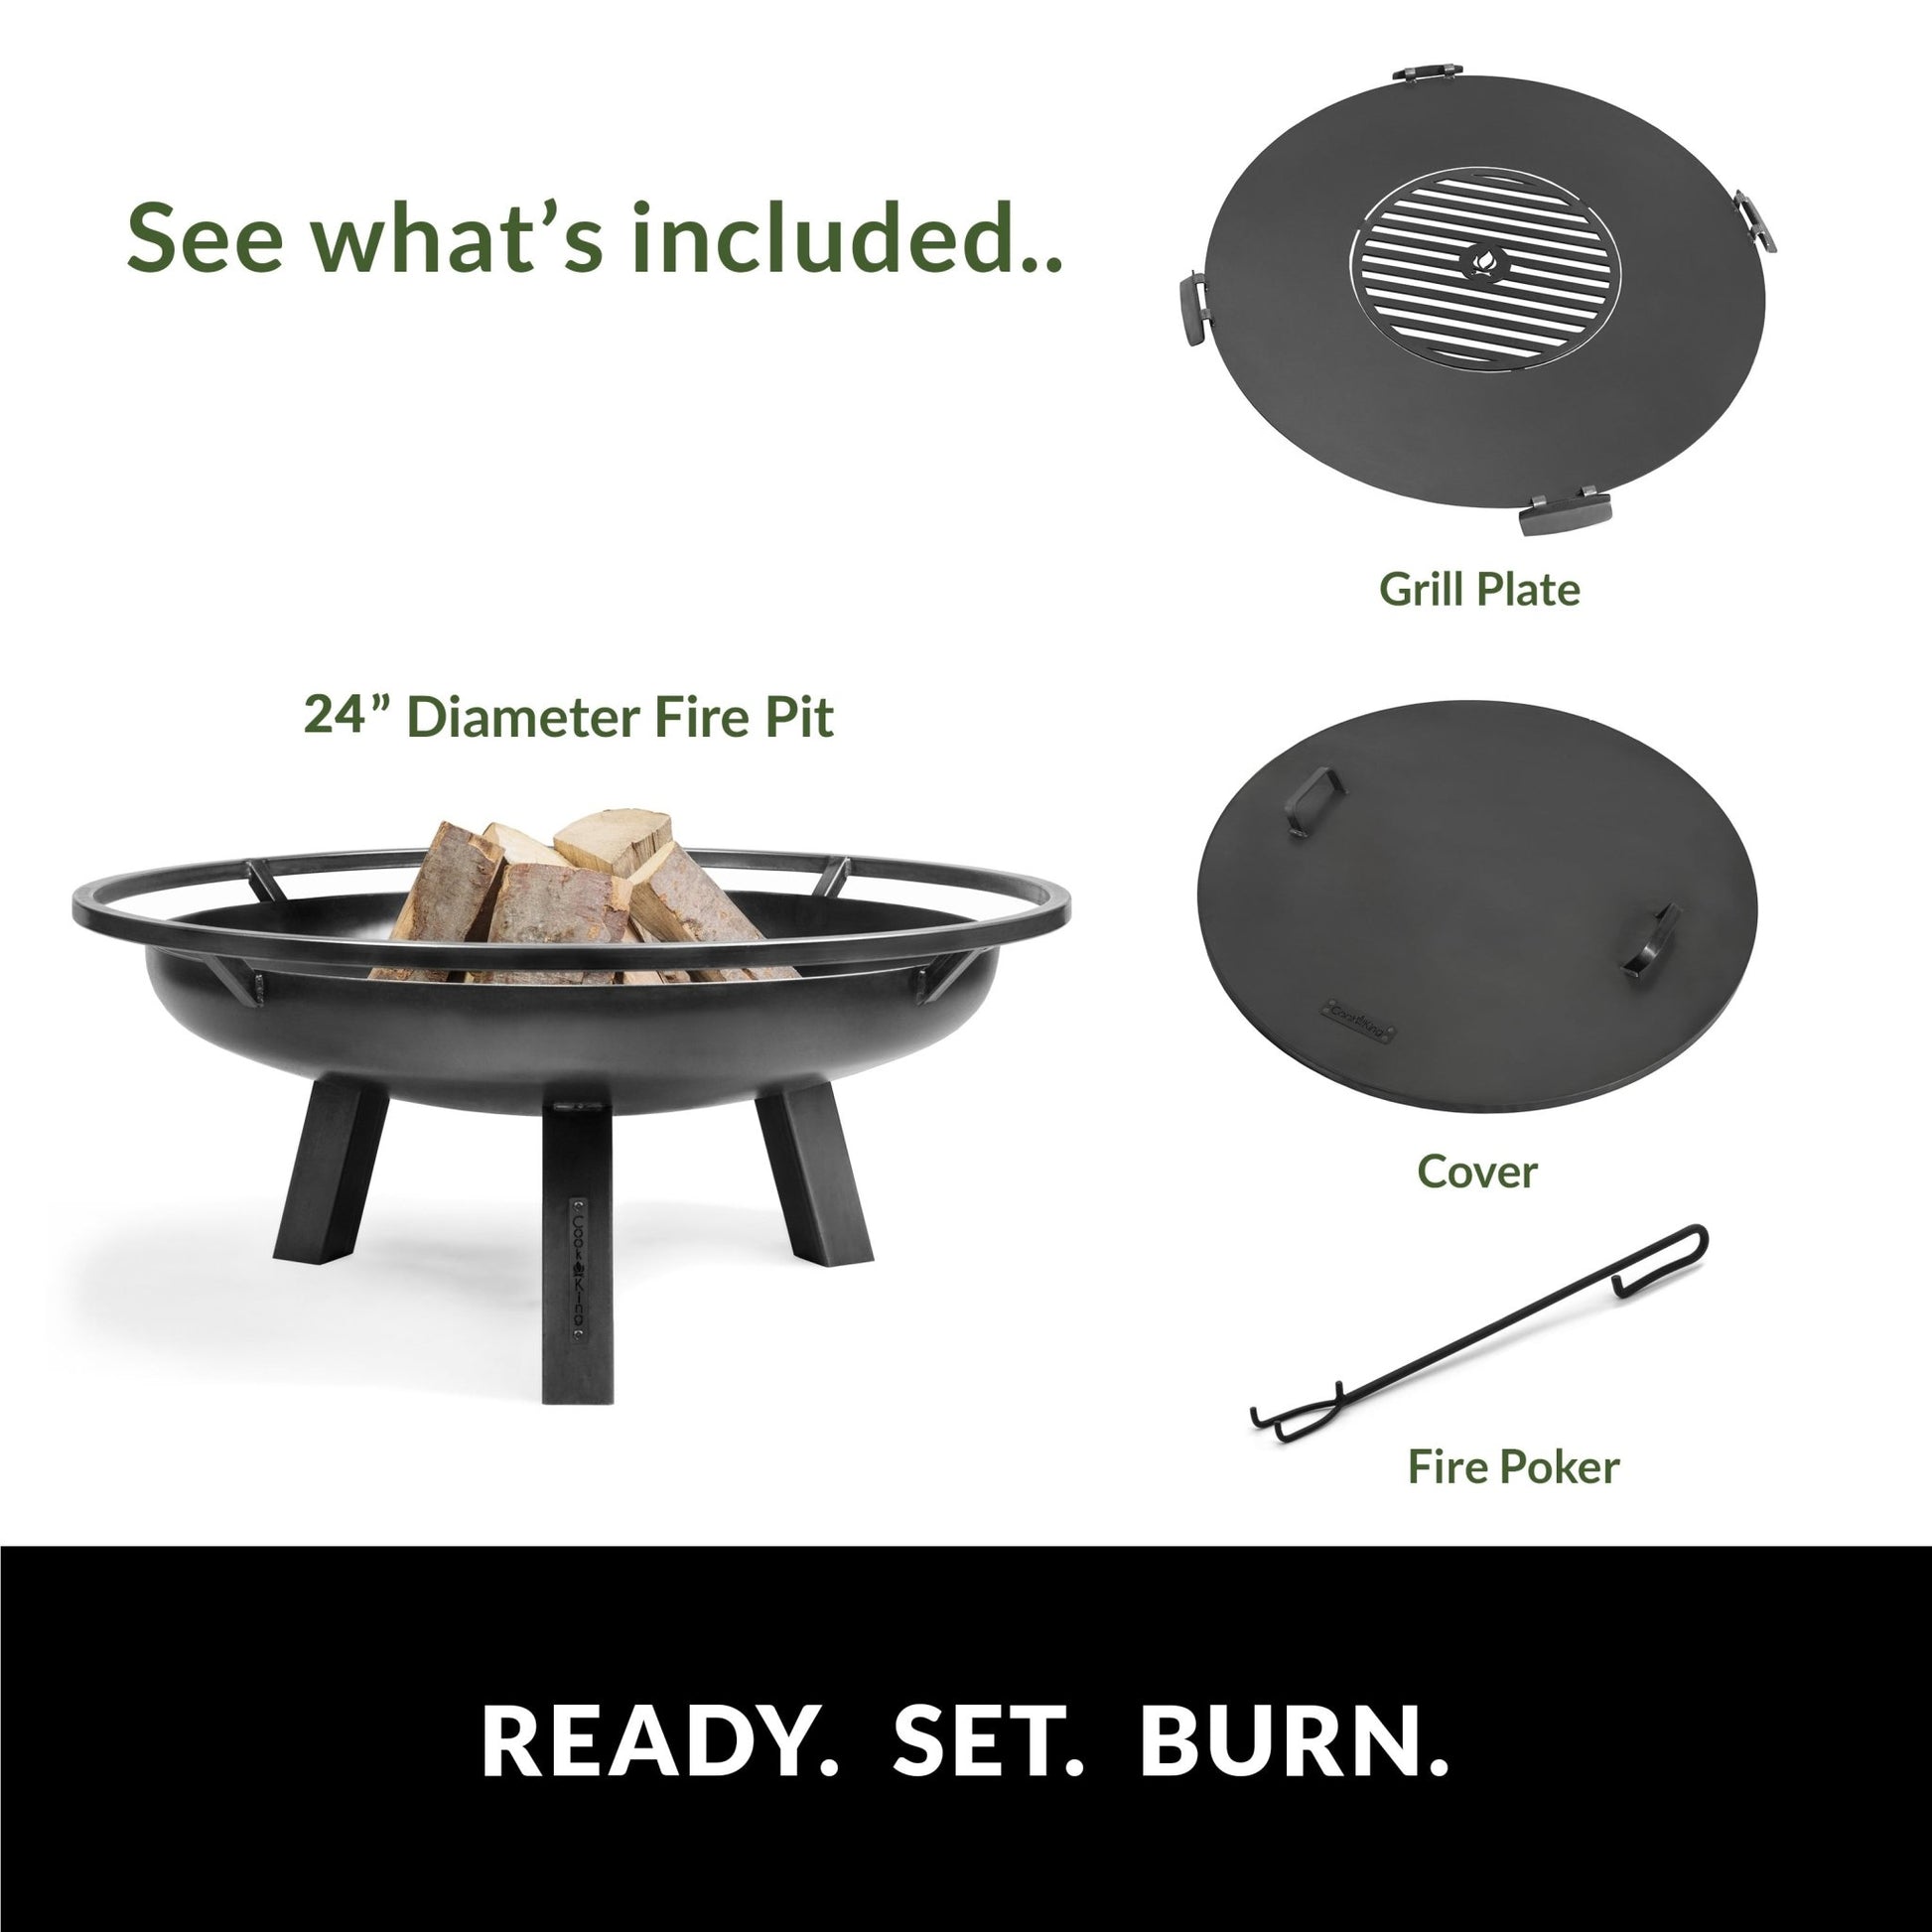 Porto 24" Fire Pit with Grill Plate and Cover Lid - Good Directions